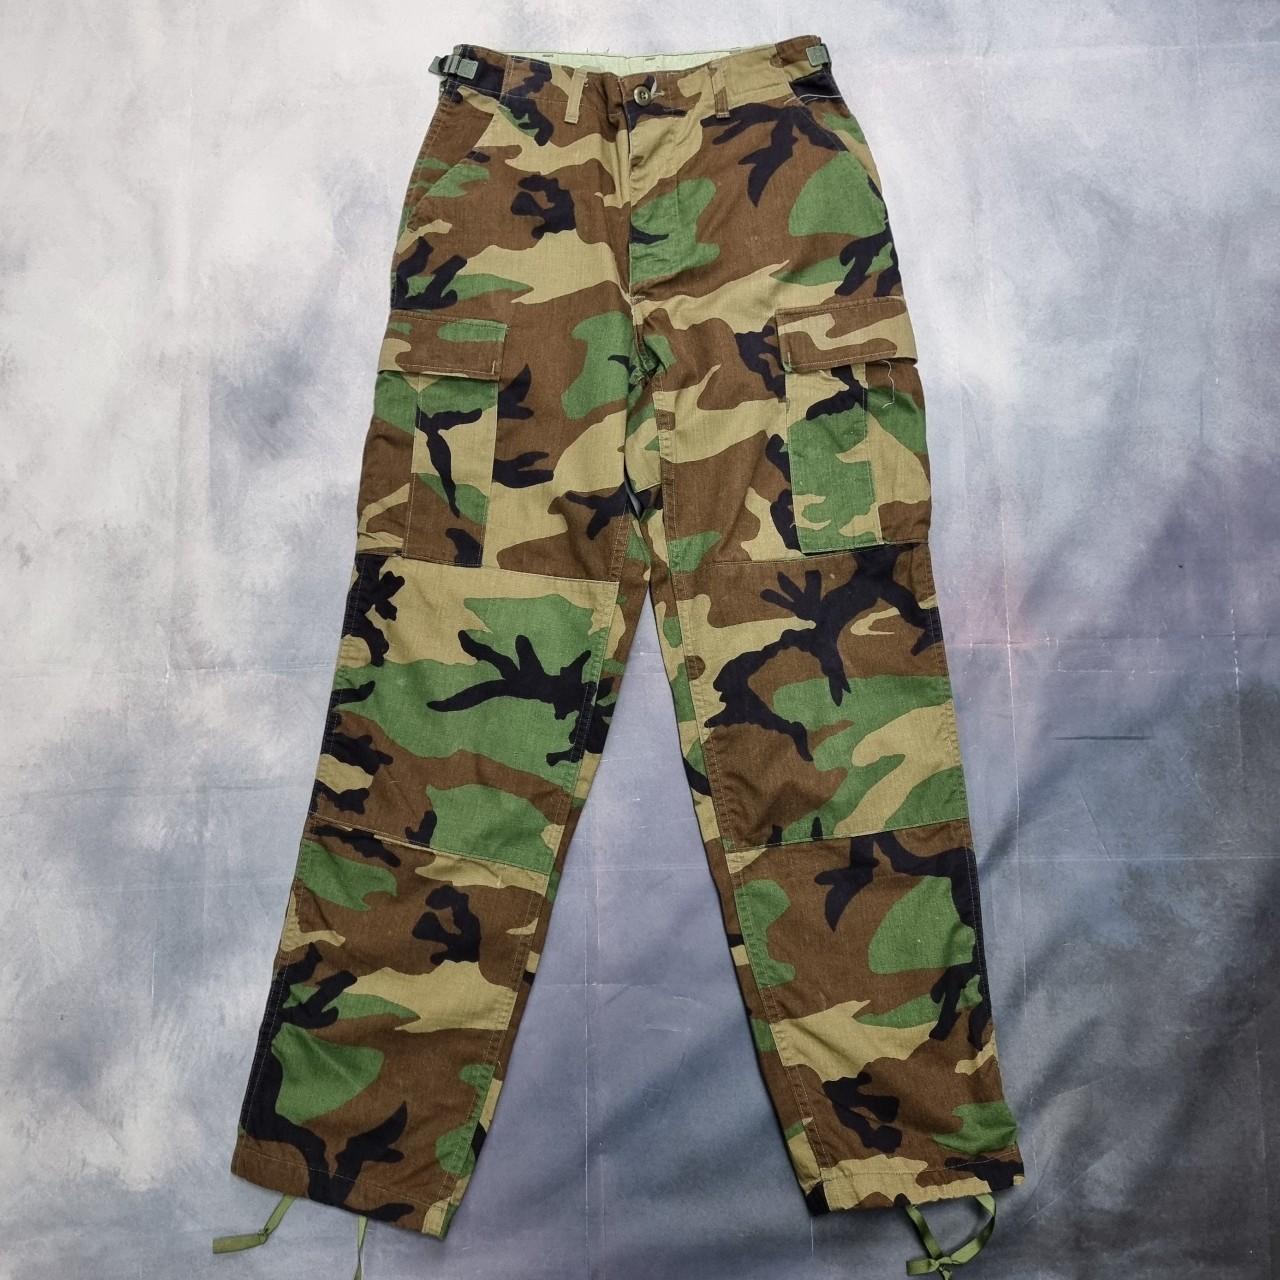 Vintage 1994 US Army issued woodland camouflage... - Depop